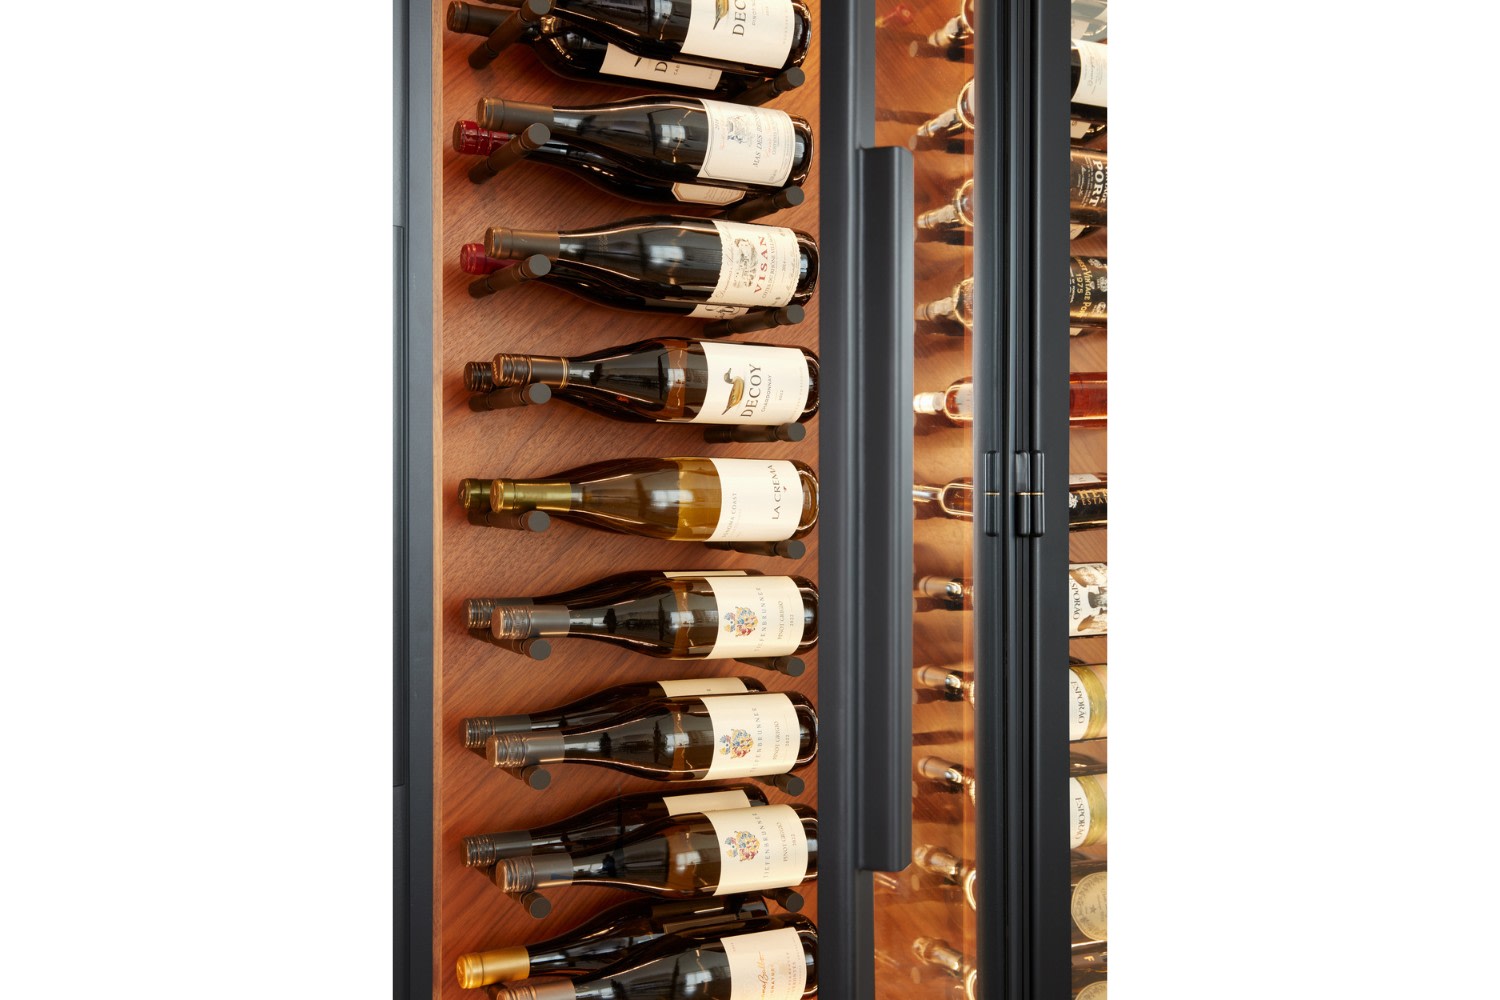 Project Park: Close Up Details of Pegs in Custom Wine Rack